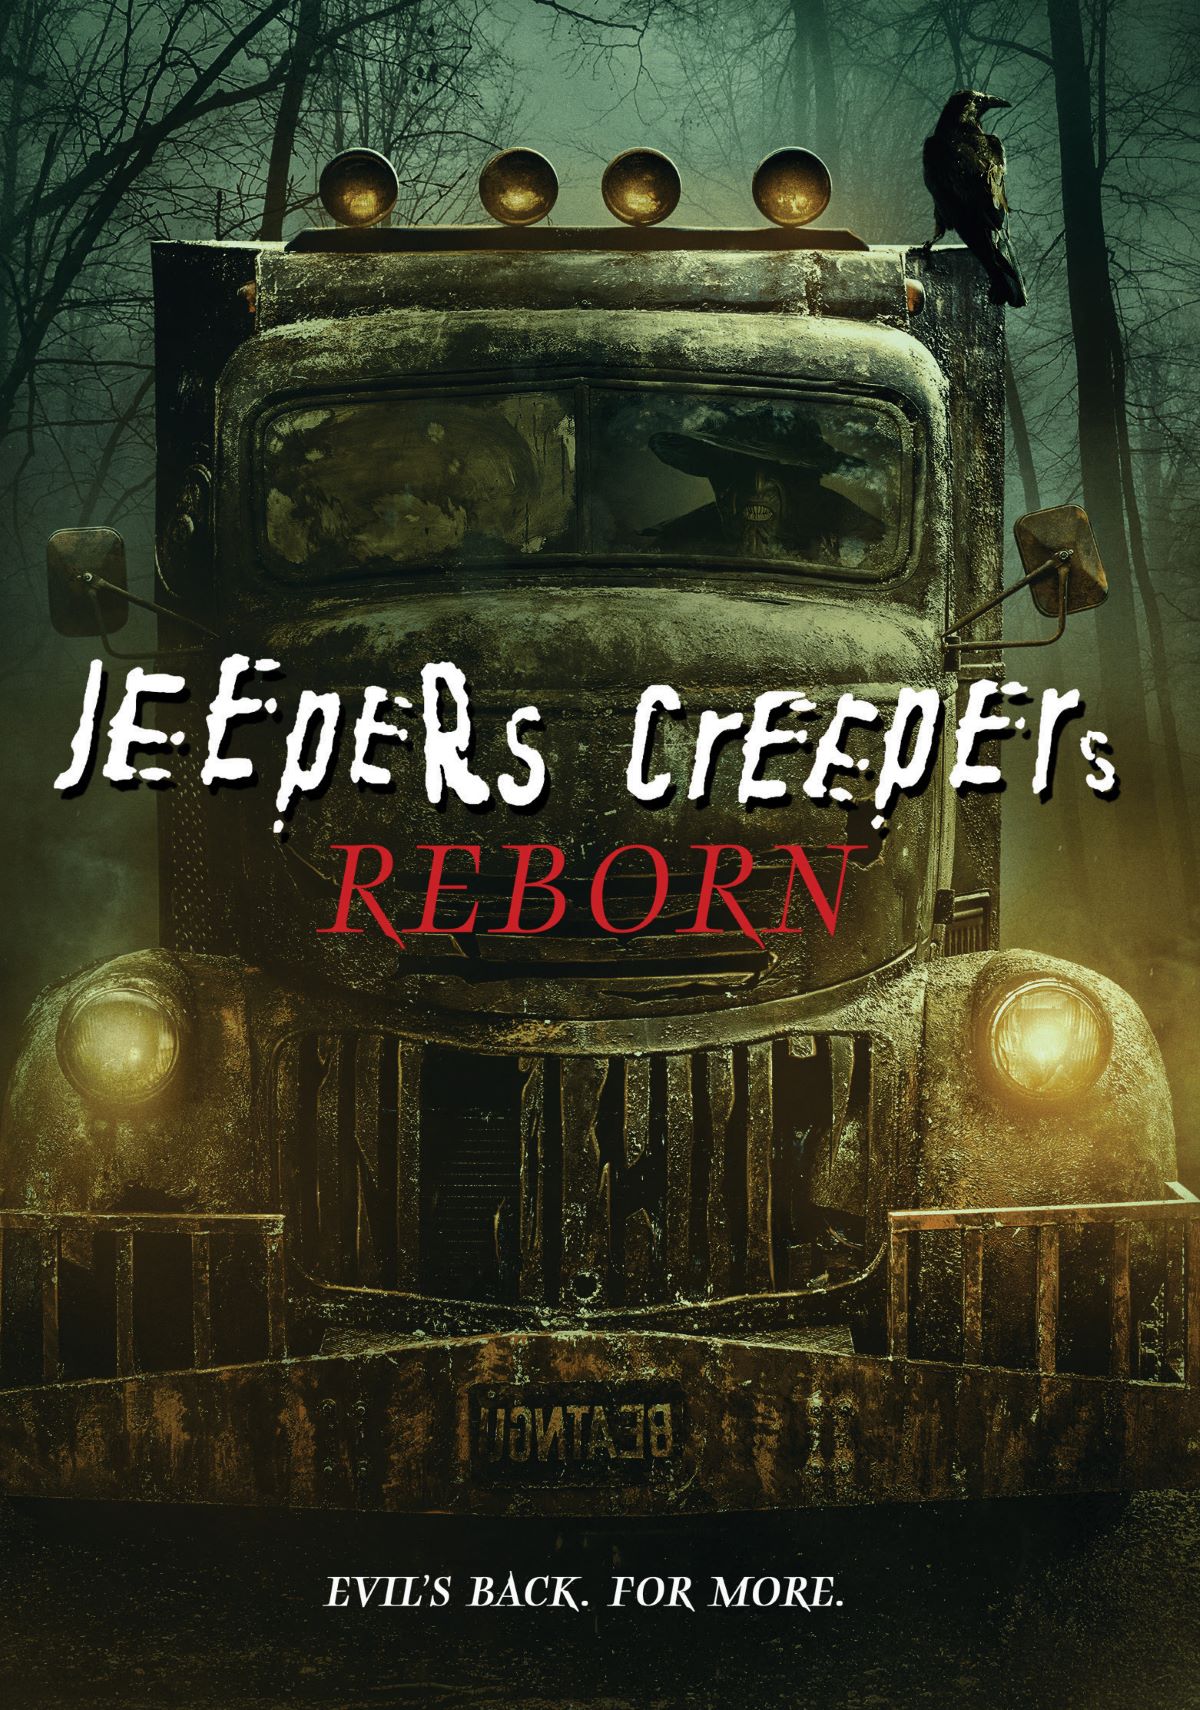 Jeepers Creepers: Reborn (DVD) - image 1 of 8